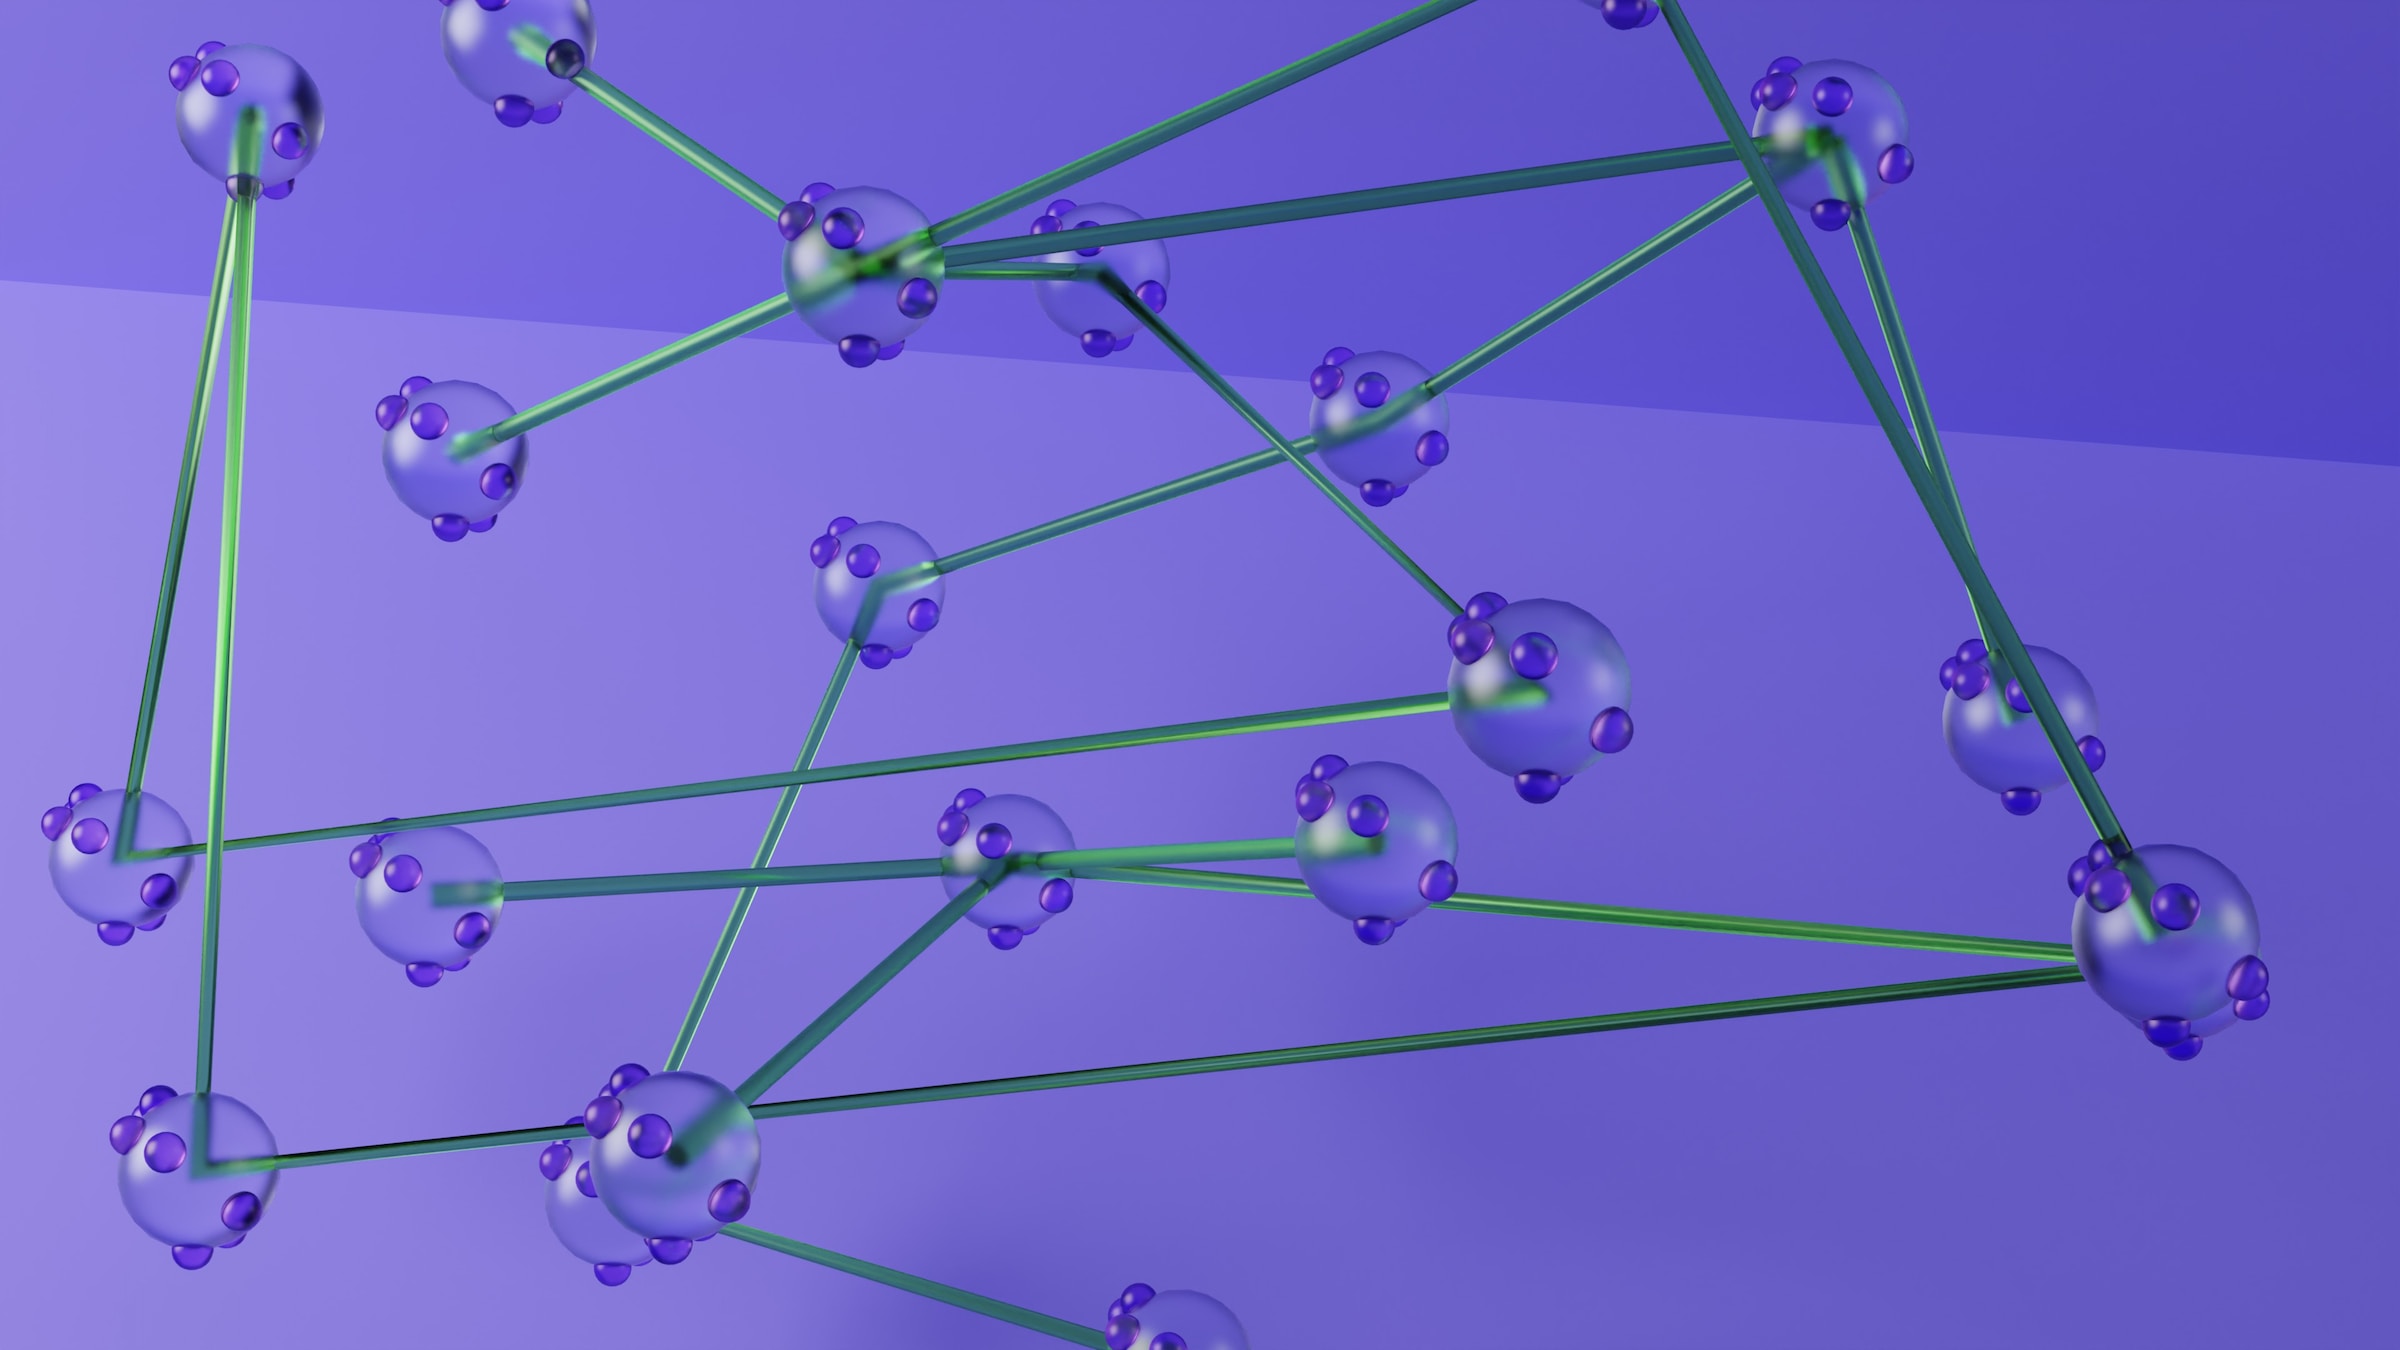 A network of transparent spheres connected together by translucent green connectors, like asset tokenization connects the physical and digital worlds together.